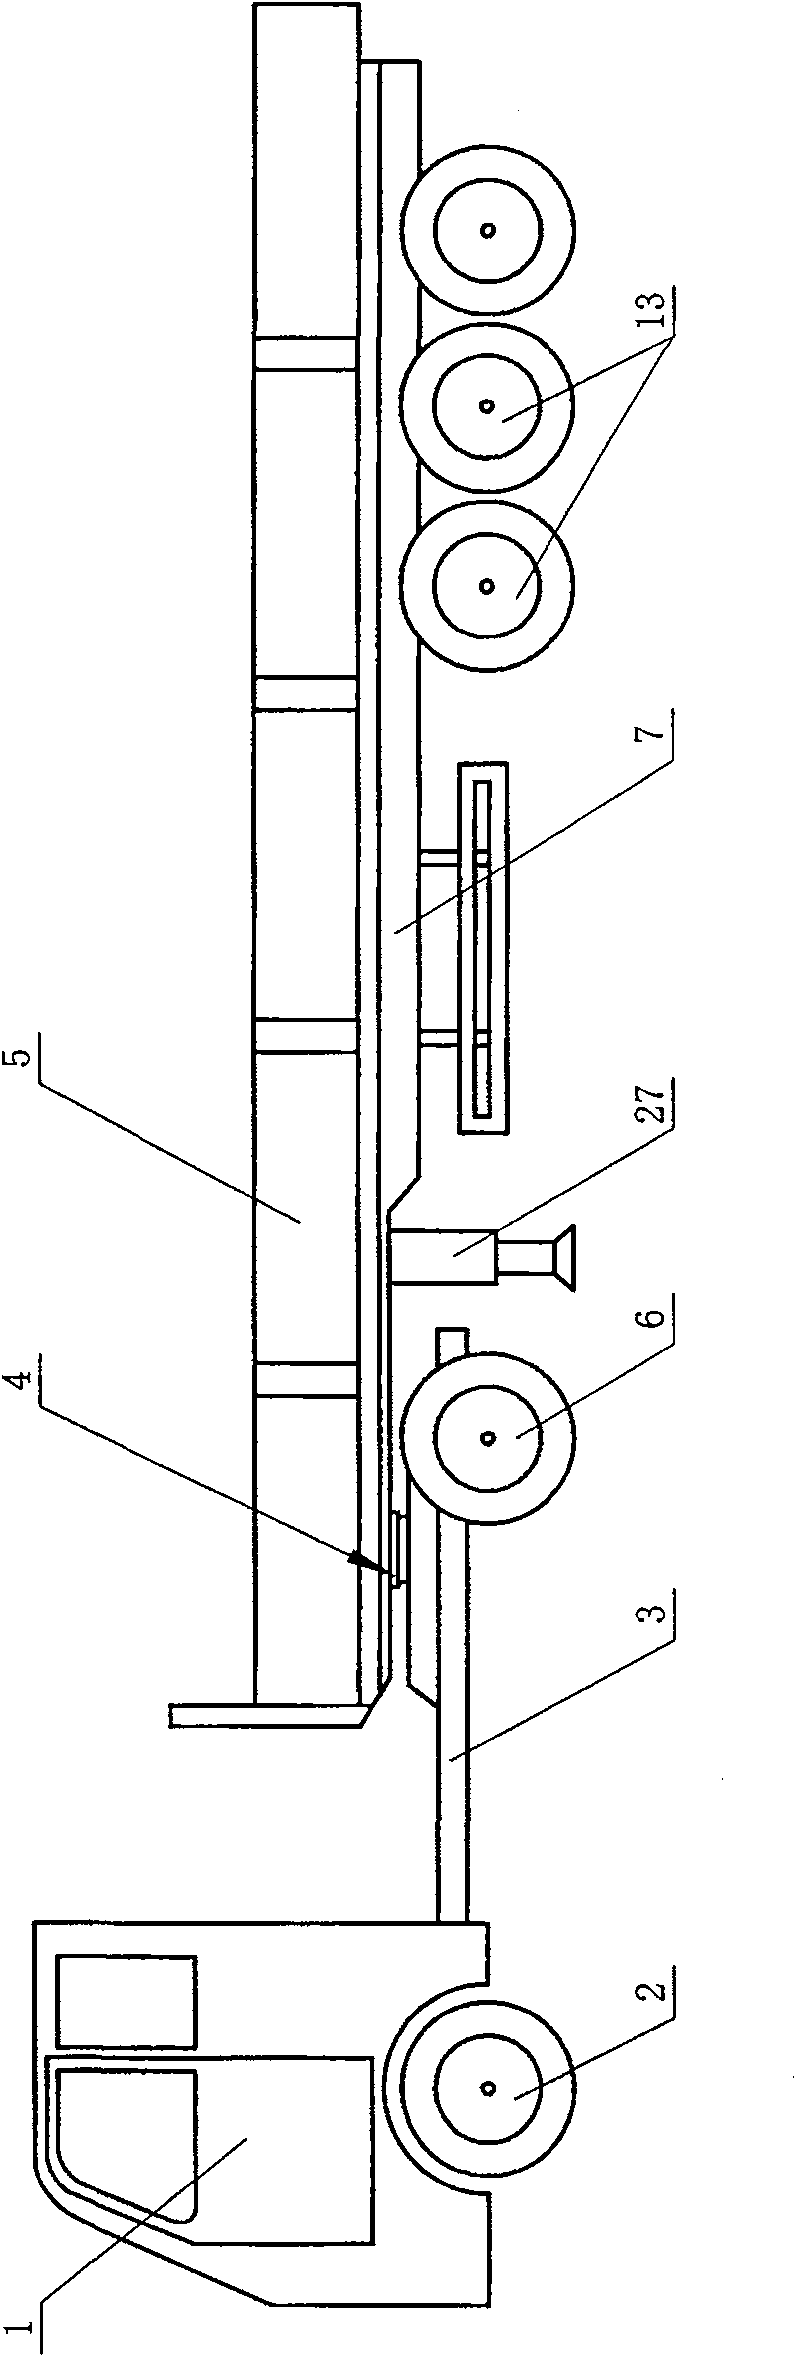 Semi-trailer with automatic synchronization steering mechanism